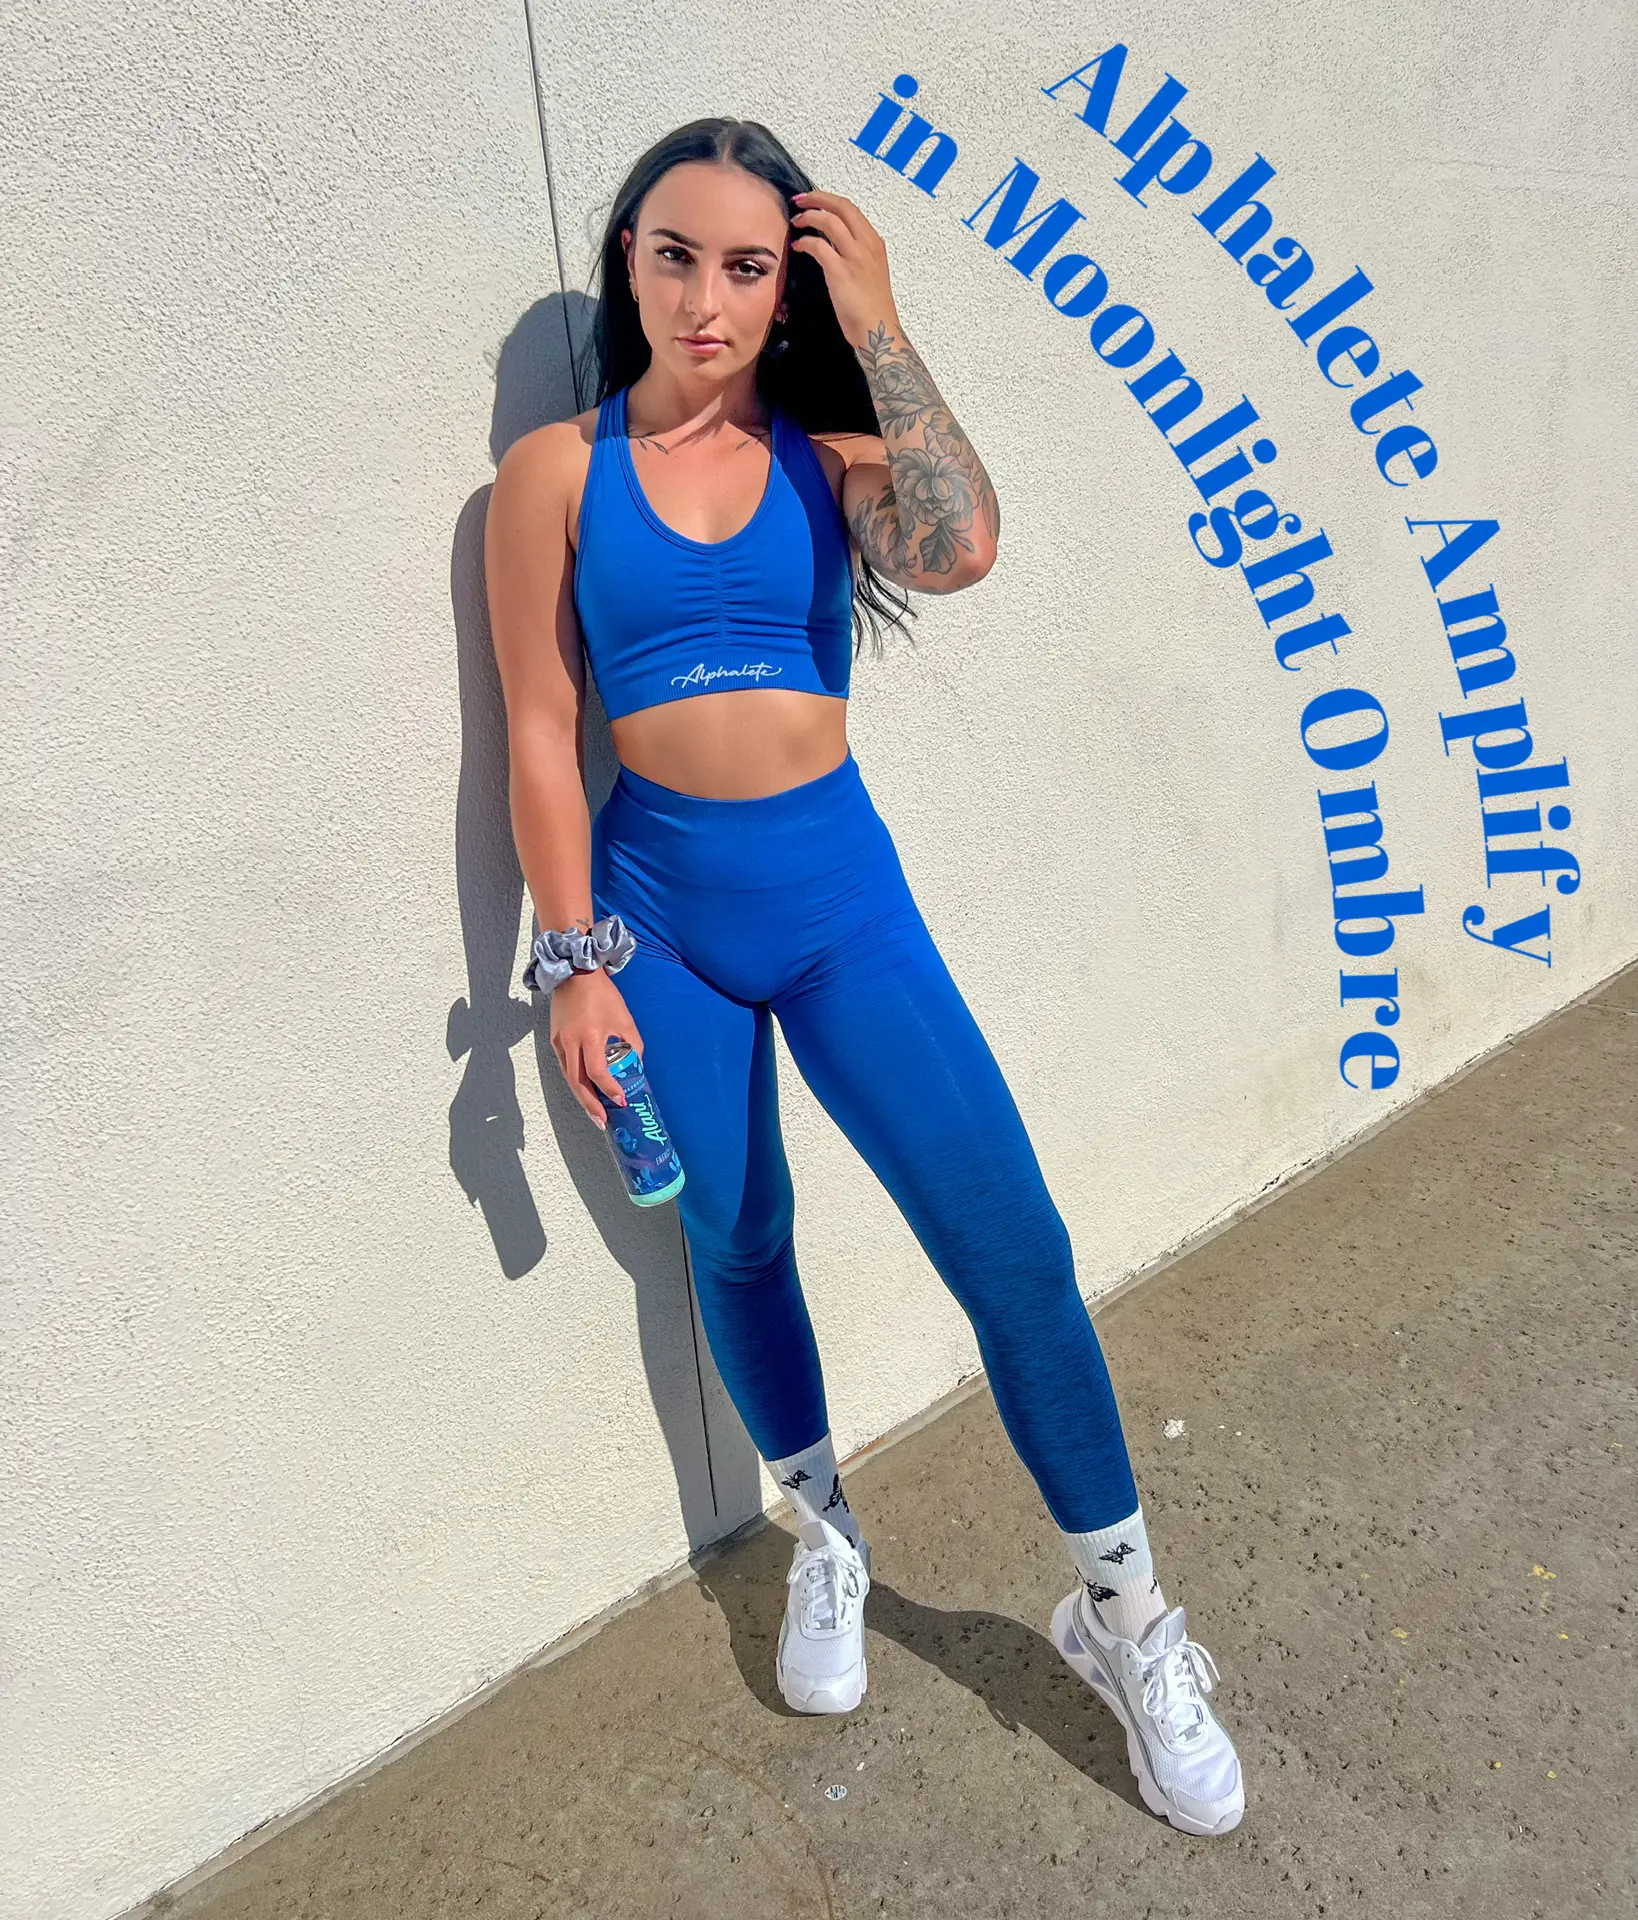 Blue Ombre Leggings Yoga, Running Pants for Women, Cute Workout